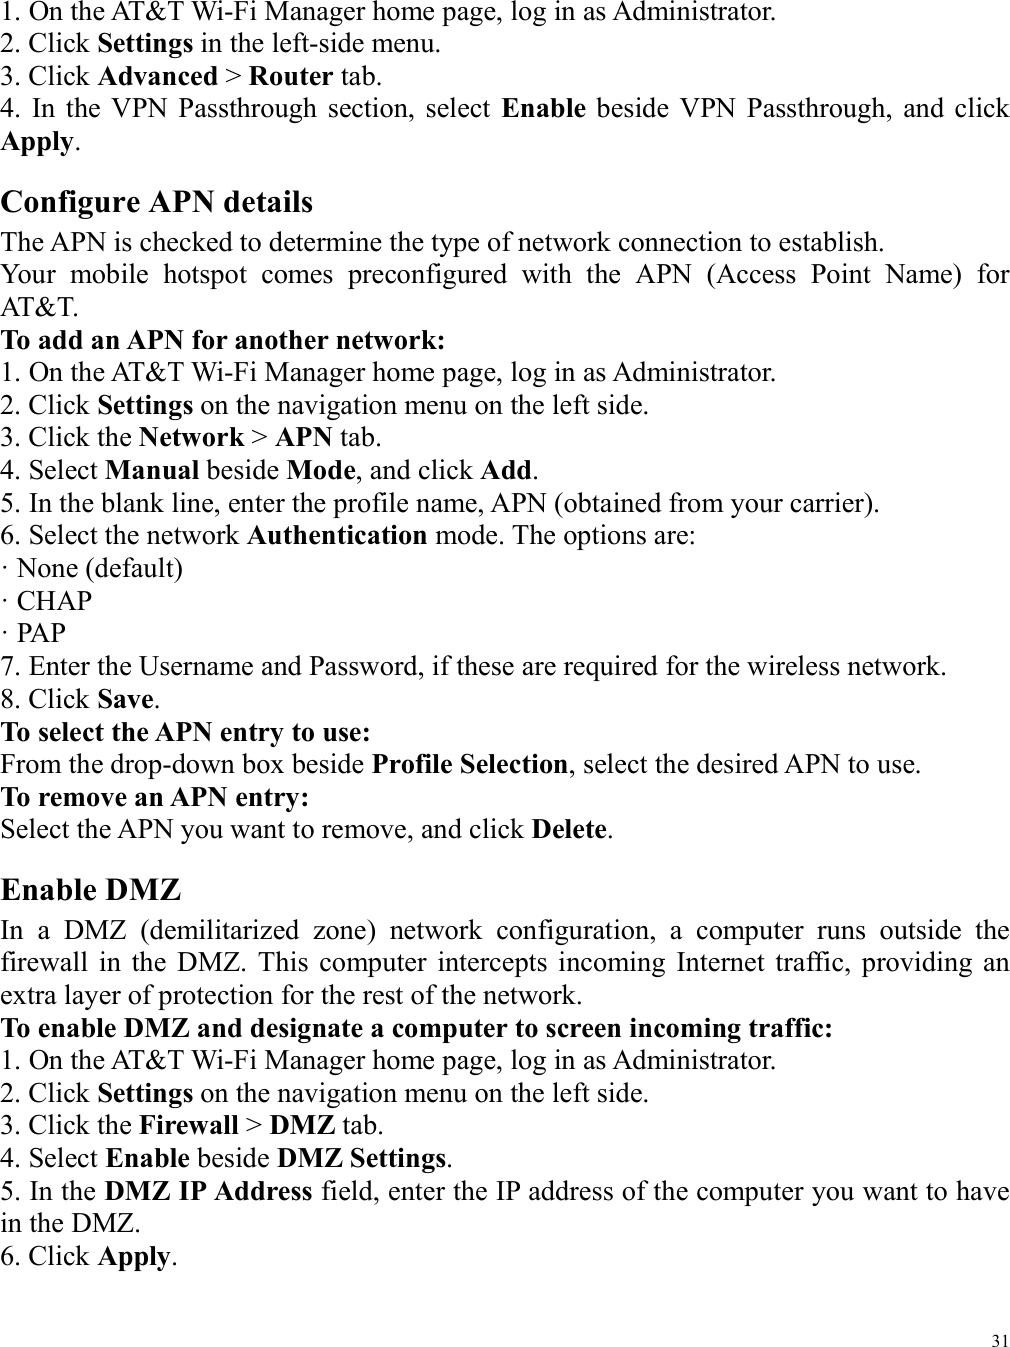 31  1. On the AT&amp;T Wi-Fi Manager home page, log in as Administrator. 2. Click Settings in the left-side menu. 3. Click Advanced &gt; Router tab. 4.  In  the VPN  Passthrough  section, select  Enable  beside  VPN  Passthrough,  and  click Apply. Configure APN details The APN is checked to determine the type of network connection to establish. Your  mobile  hotspot  comes  preconfigured  with  the  APN  (Access  Point  Name)  for AT&amp;T. To add an APN for another network: 1. On the AT&amp;T Wi-Fi Manager home page, log in as Administrator. 2. Click Settings on the navigation menu on the left side. 3. Click the Network &gt; APN tab. 4. Select Manual beside Mode, and click Add. 5. In the blank line, enter the profile name, APN (obtained from your carrier). 6. Select the network Authentication mode. The options are: · None (default) · CHAP · PAP 7. Enter the Username and Password, if these are required for the wireless network. 8. Click Save. To select the APN entry to use: From the drop-down box beside Profile Selection, select the desired APN to use. To remove an APN entry: Select the APN you want to remove, and click Delete. Enable DMZ In  a  DMZ  (demilitarized  zone)  network  configuration,  a  computer  runs  outside  the firewall  in  the  DMZ.  This  computer  intercepts incoming  Internet  traffic,  providing  an extra layer of protection for the rest of the network. To enable DMZ and designate a computer to screen incoming traffic: 1. On the AT&amp;T Wi-Fi Manager home page, log in as Administrator. 2. Click Settings on the navigation menu on the left side. 3. Click the Firewall &gt; DMZ tab. 4. Select Enable beside DMZ Settings. 5. In the DMZ IP Address field, enter the IP address of the computer you want to have in the DMZ. 6. Click Apply.   